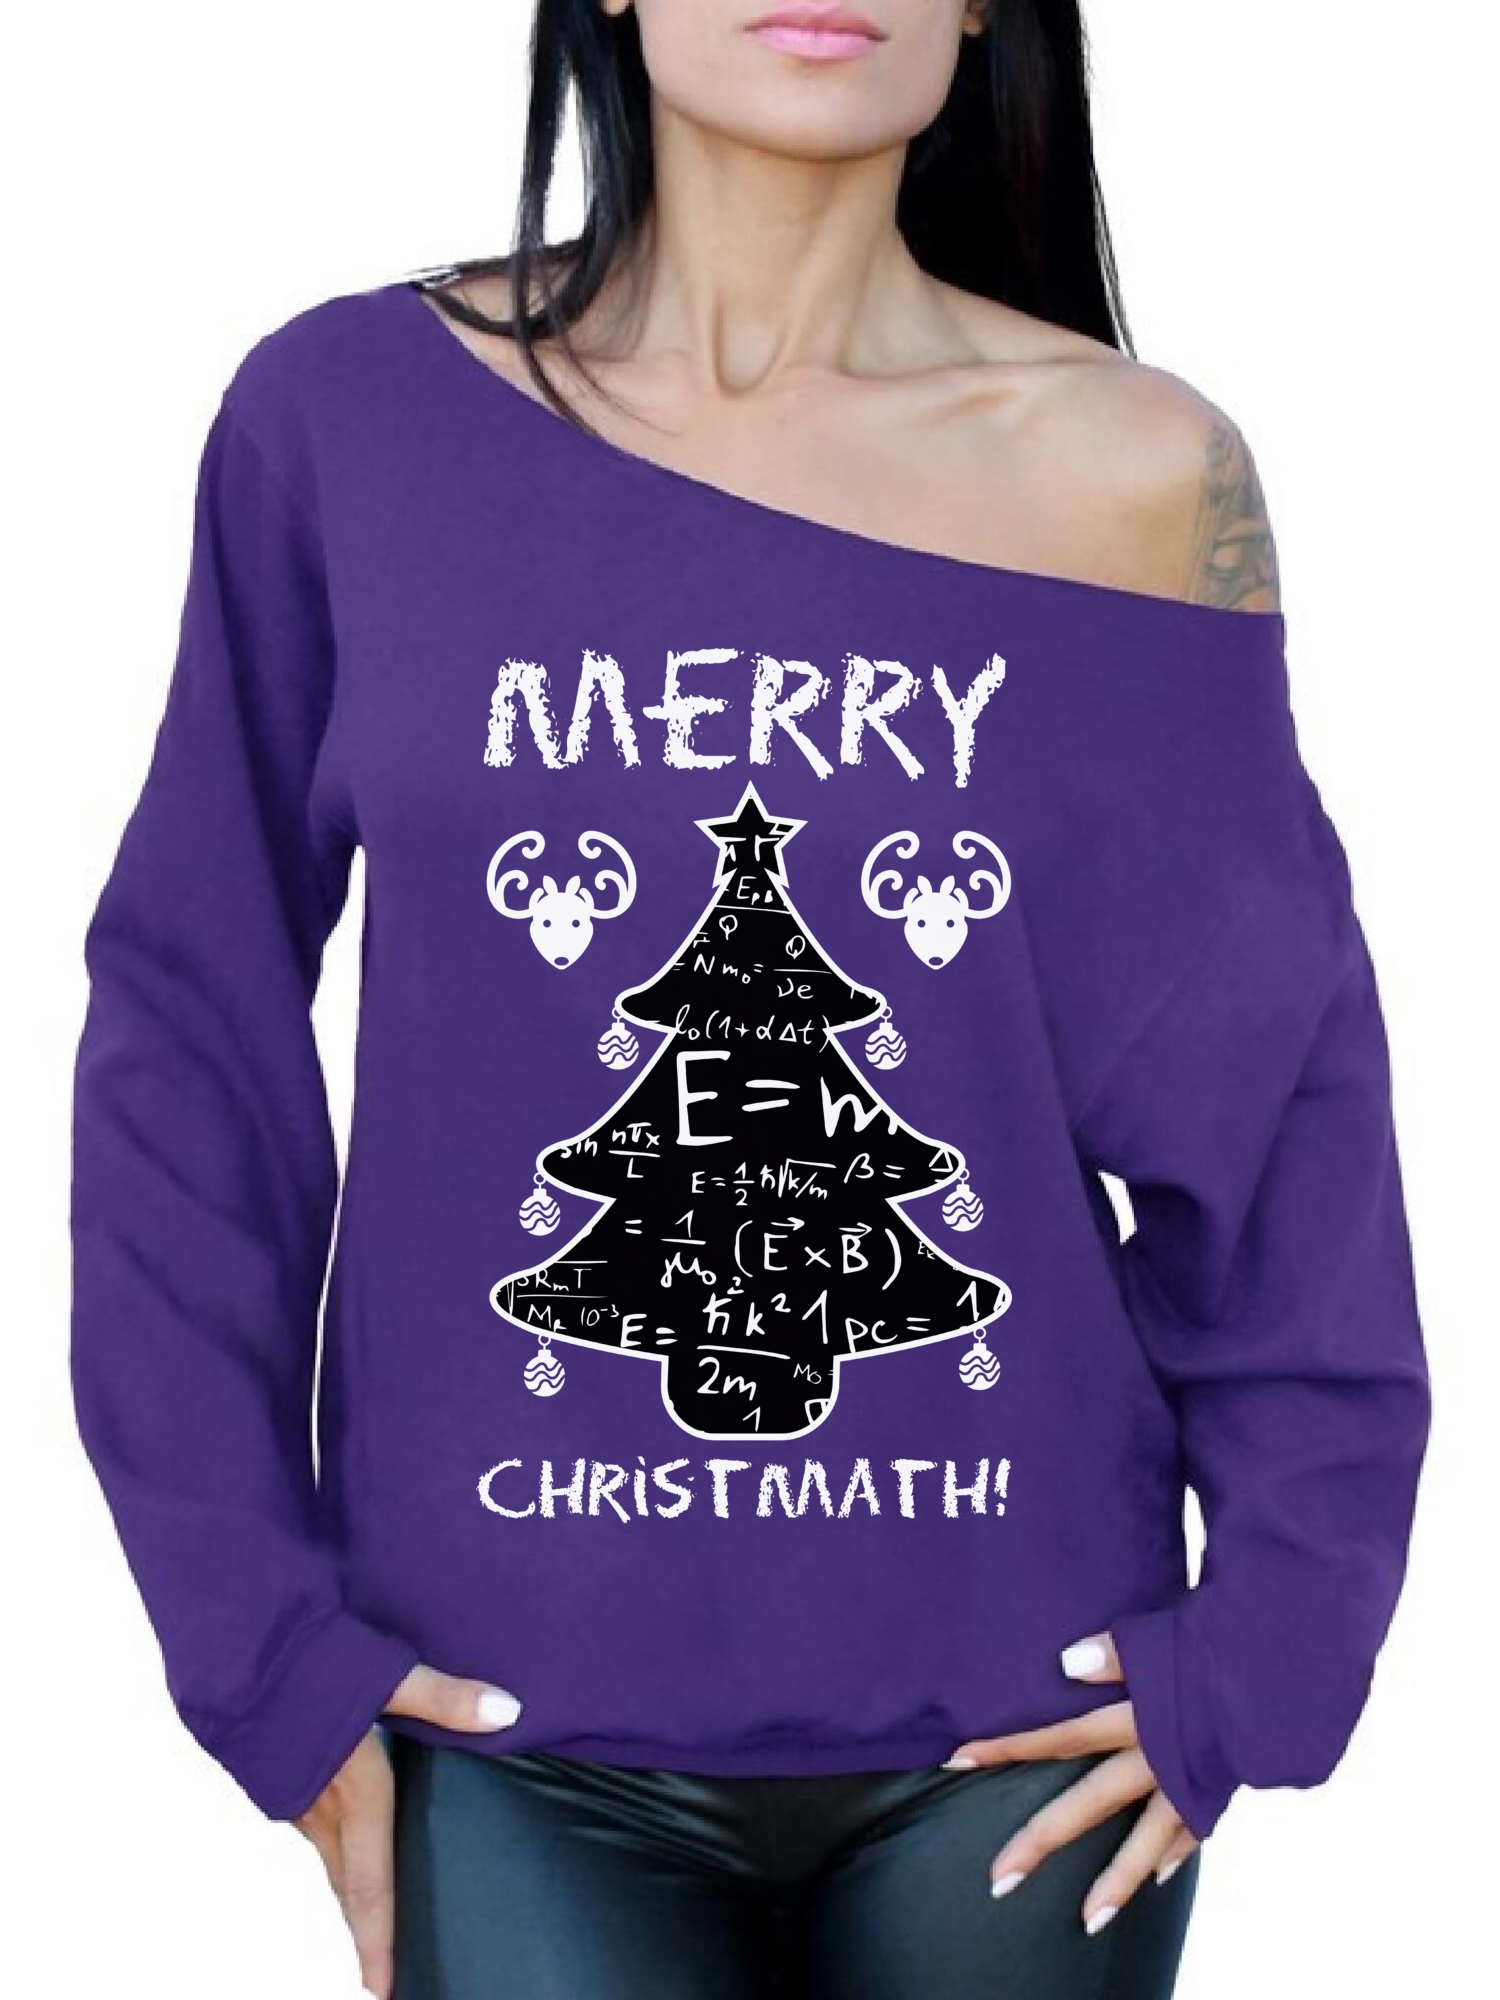 Awkward Styles Merry Christmath Off The Shoulder Sweatshirt Christmas Math Formulas Oversized Sweater for Women Nerdy Gifts for Christmas Math Ugly Christmas Sweater Xmas Party Outfit Xmas Math Gifts - image 1 of 5